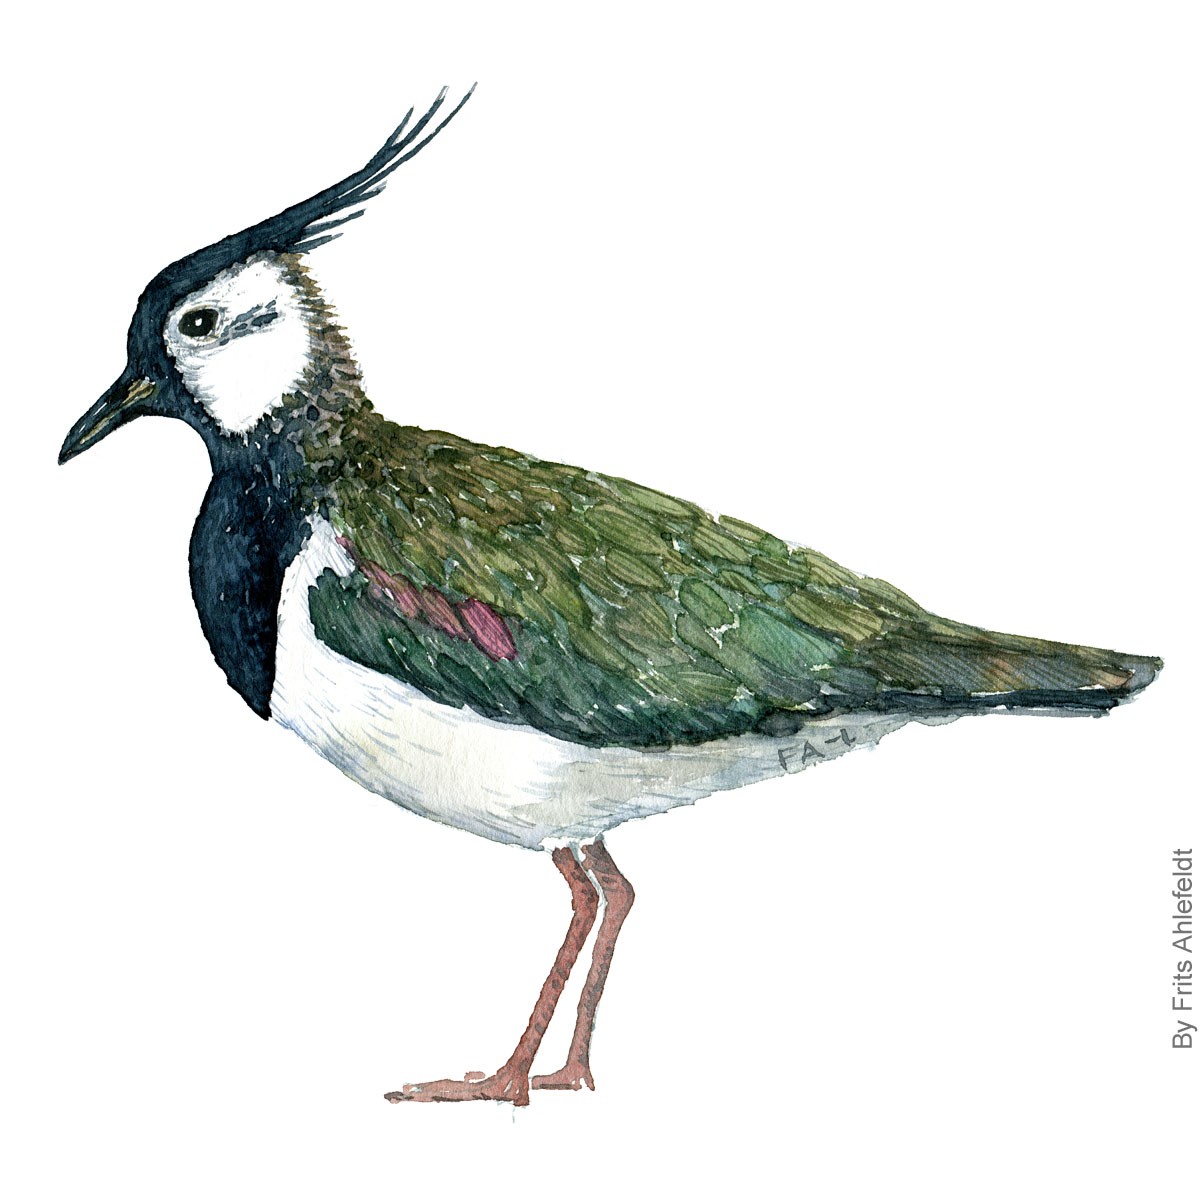 watercolor-bird-northern-lapwing-pewit-vibe-frits-ahlefeldt.jpg